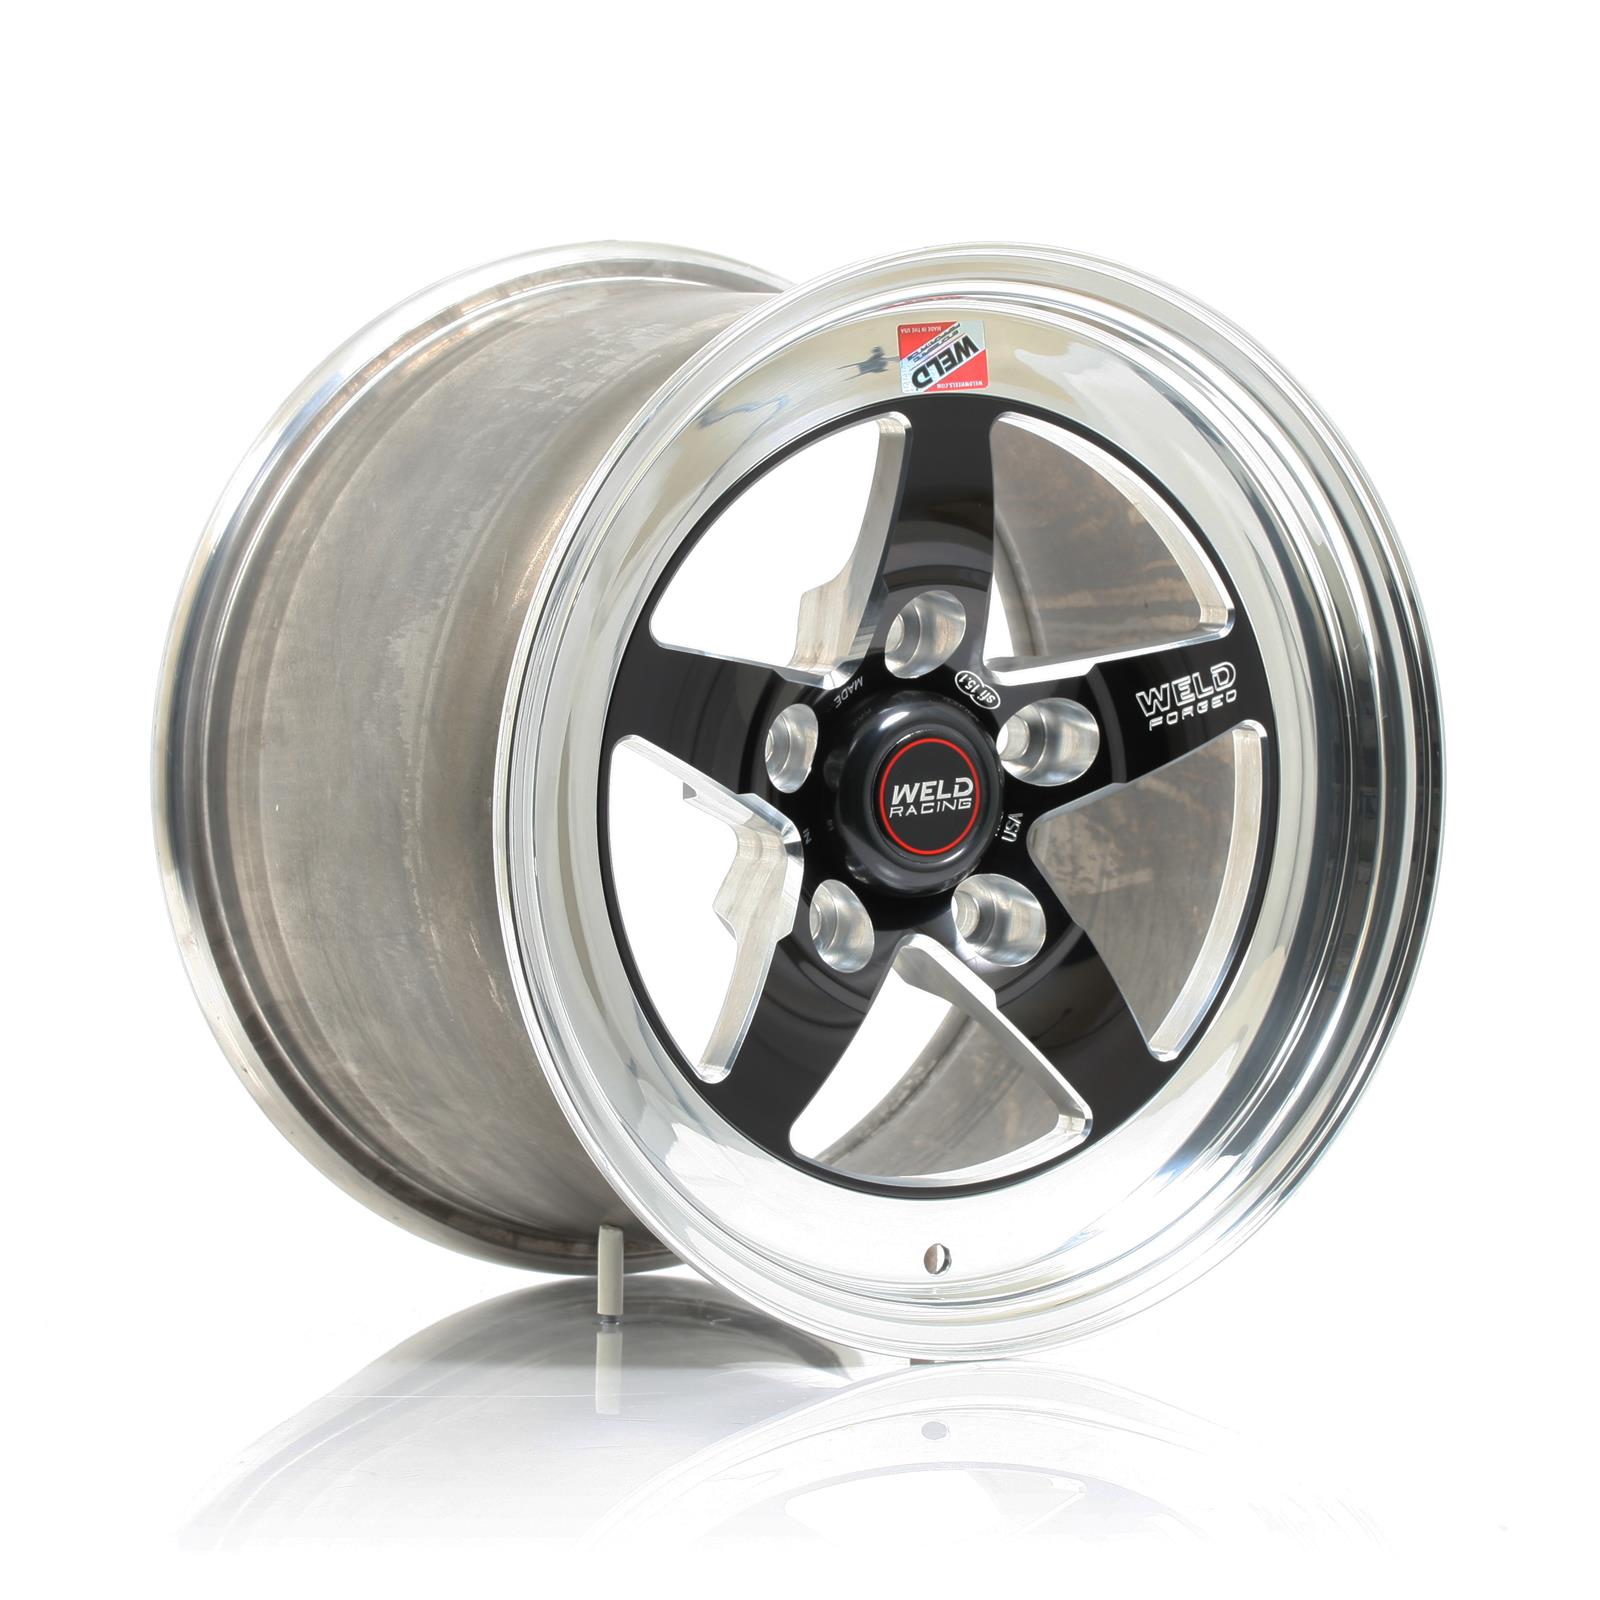 Weld Racing RT-S S71 Forged Aluminum Black Anodized Wheels - 18x11" w/8.2" Back Spacing